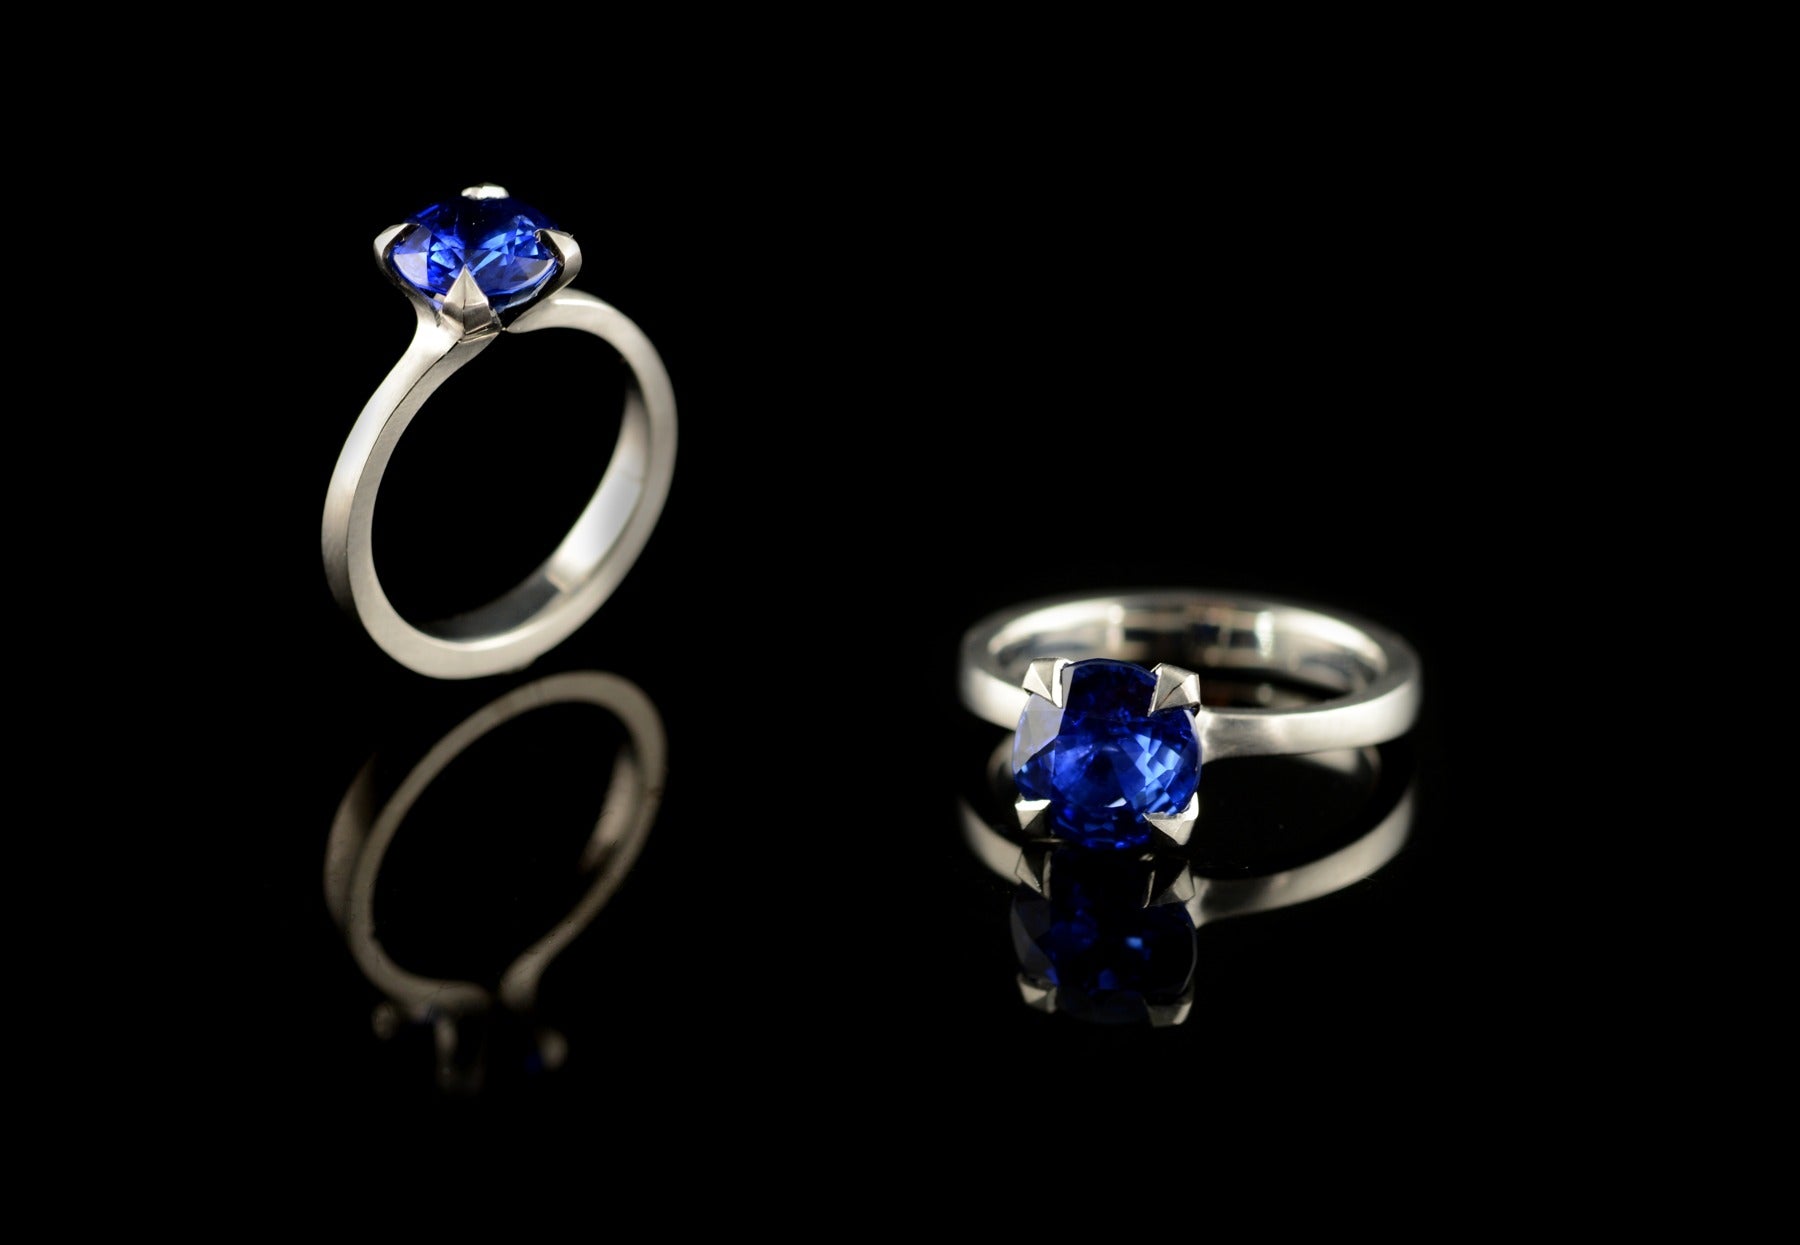 4-claw platinum and sapphire ring with pointed claws